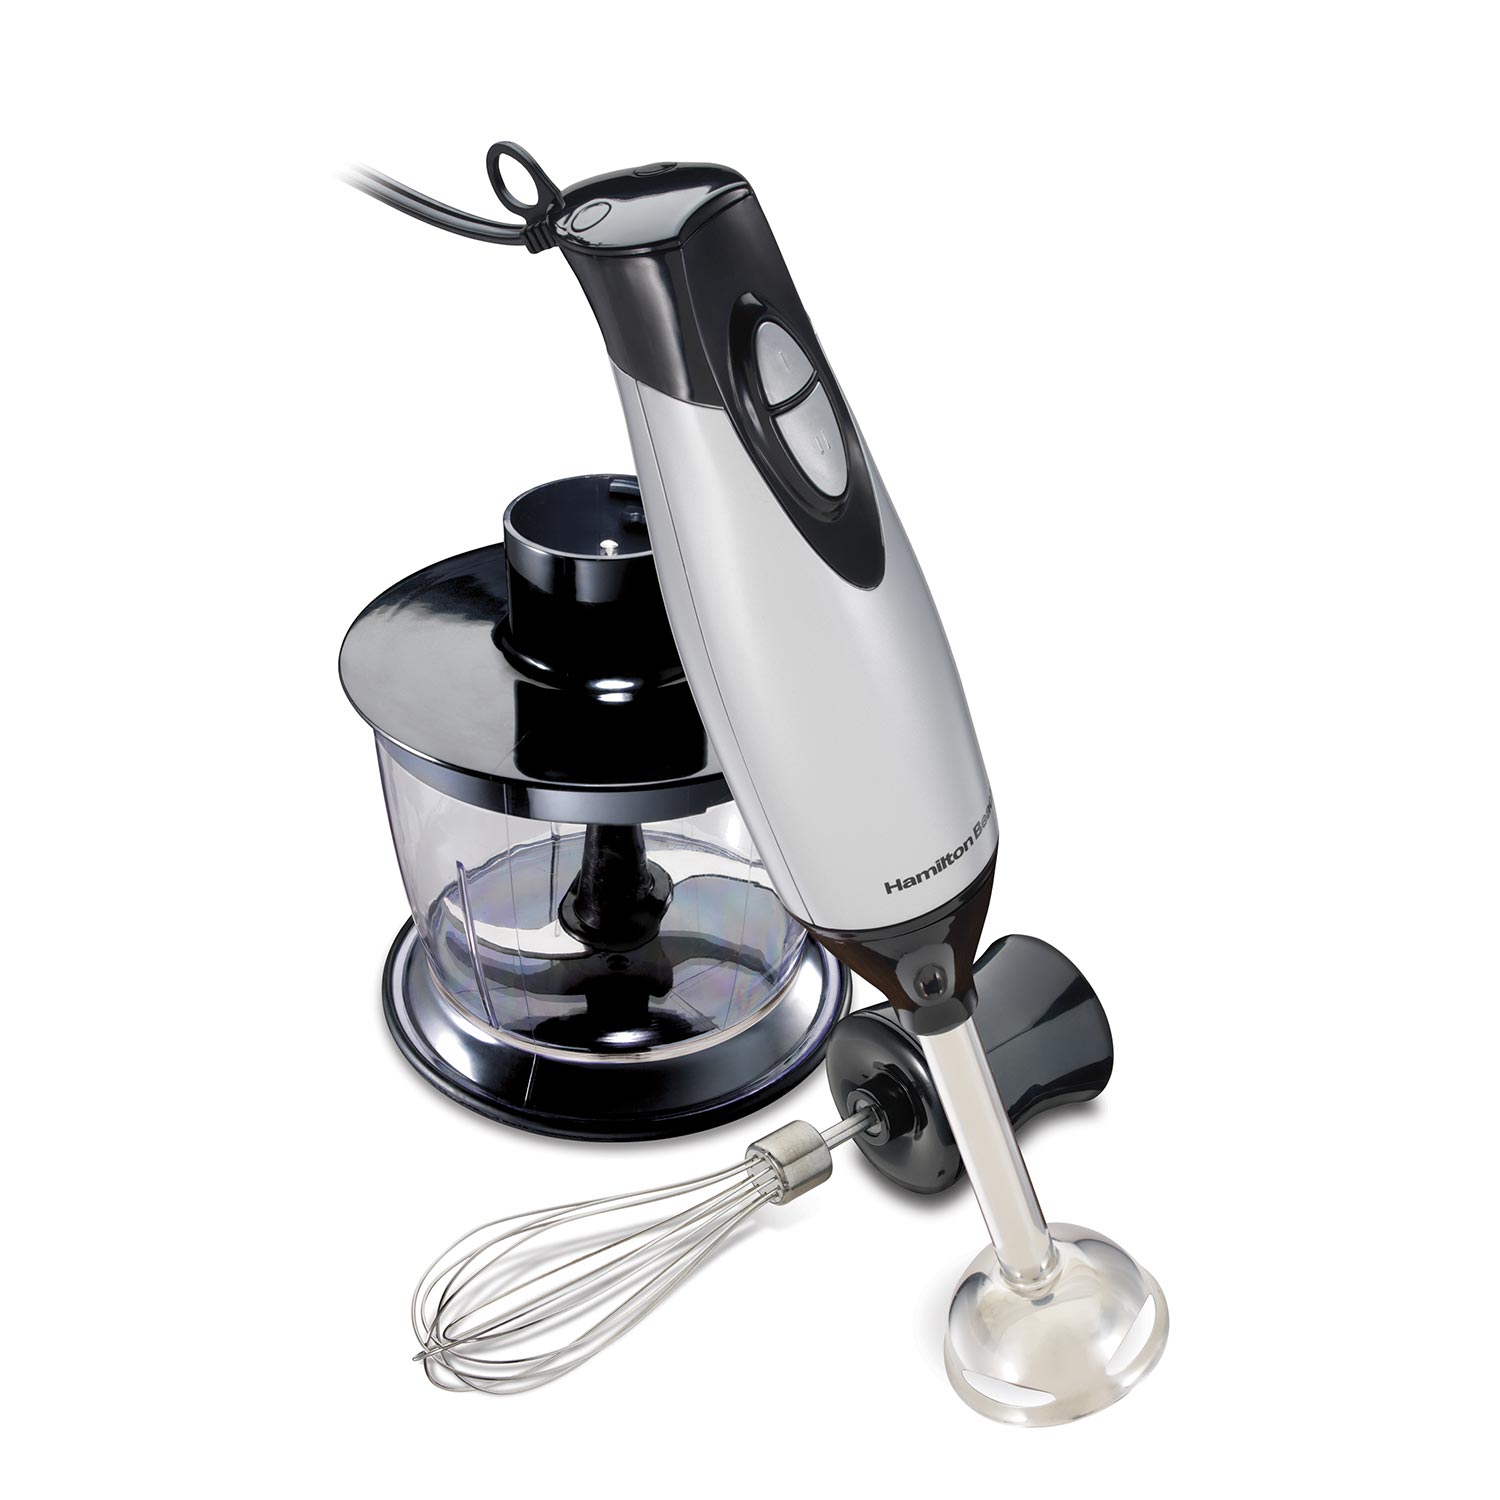 2 Speed Hand Blender with Whisk and Chopping bowl, Silver (59765)